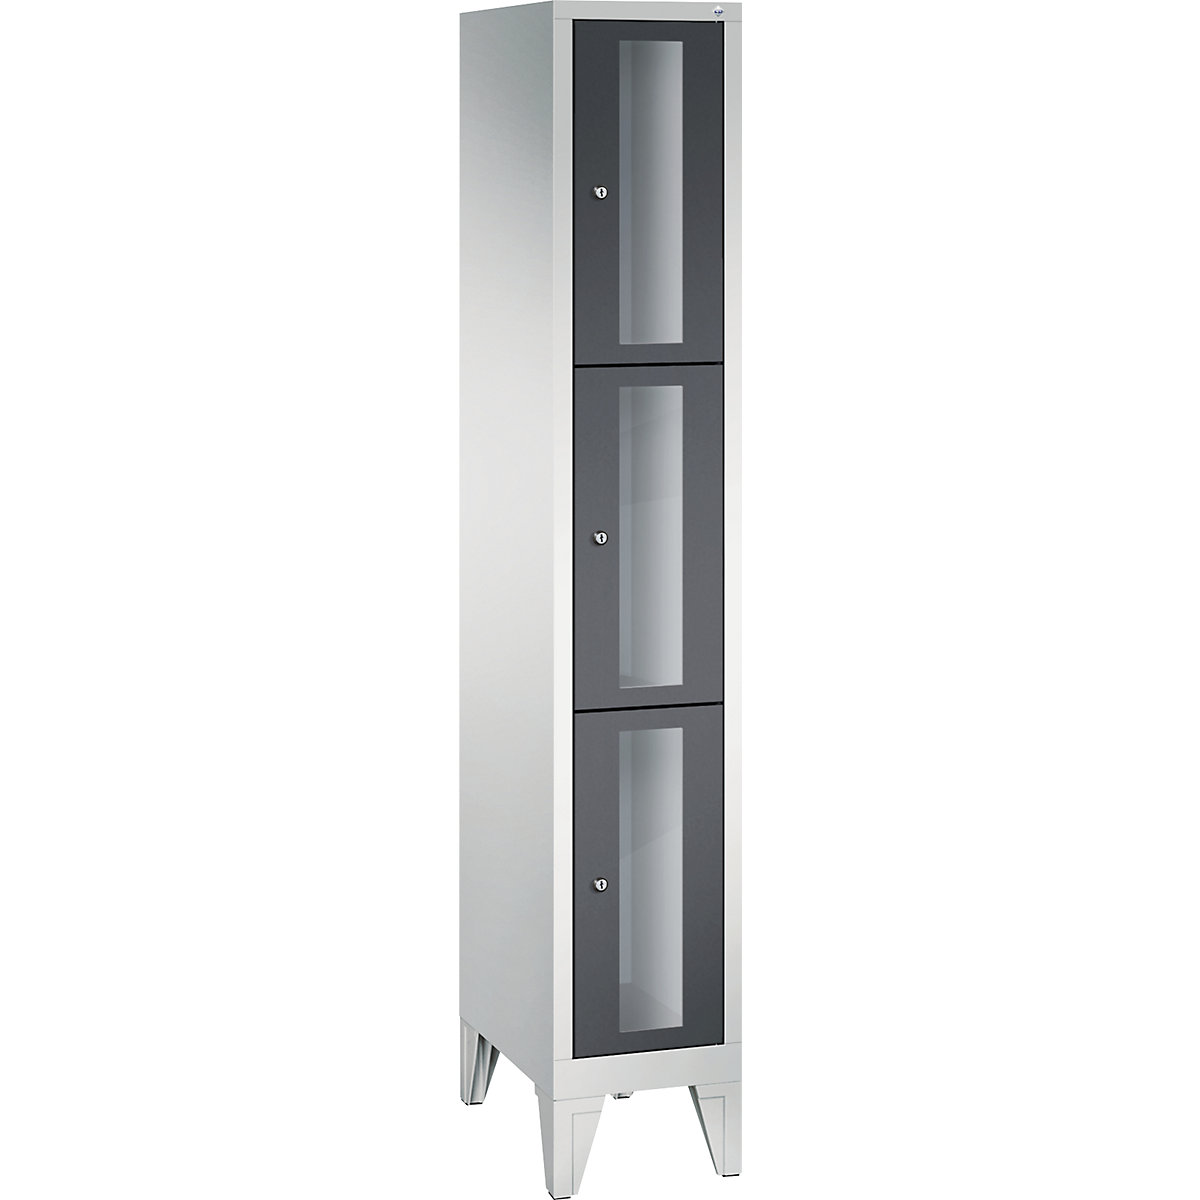 CLASSIC locker unit, compartment height 510 mm, with feet – C+P, 3 compartments, width 320 mm, black grey door-8